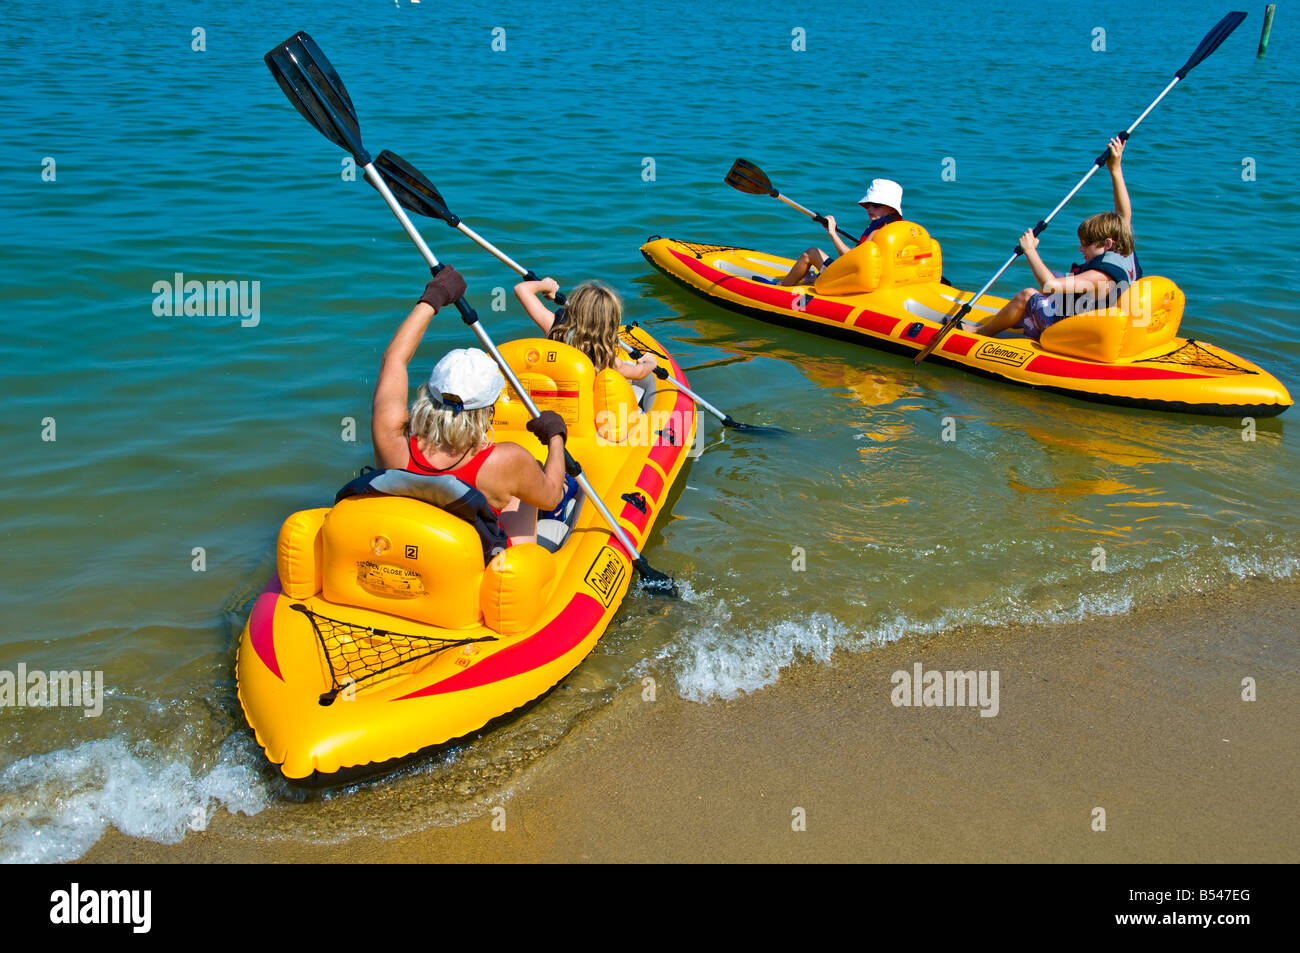 family inflatable PVC yellow kayaks summer vacations shoving off from sand beach Stock Photo